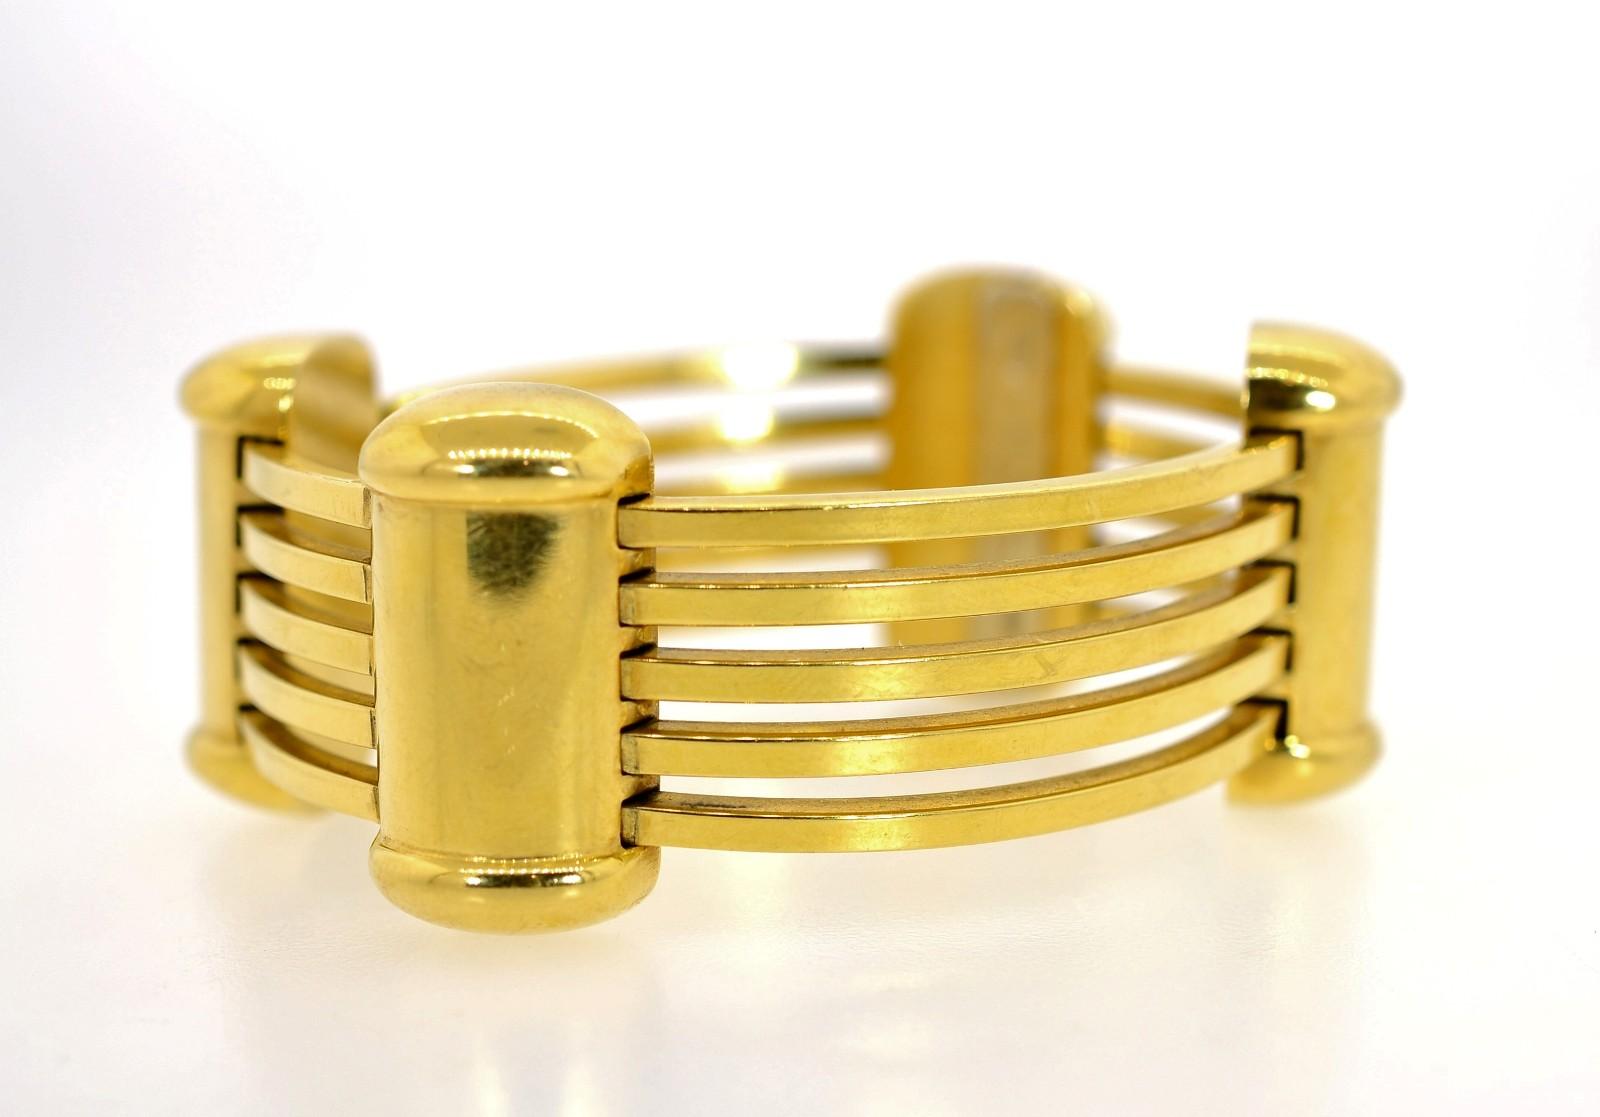 Beautifully crafted in 18KT yellow gold, this Italian made bracelet is quite impressive.  Long articulated tubes are connected by Retro-like dome sections.  Its  1 1/8